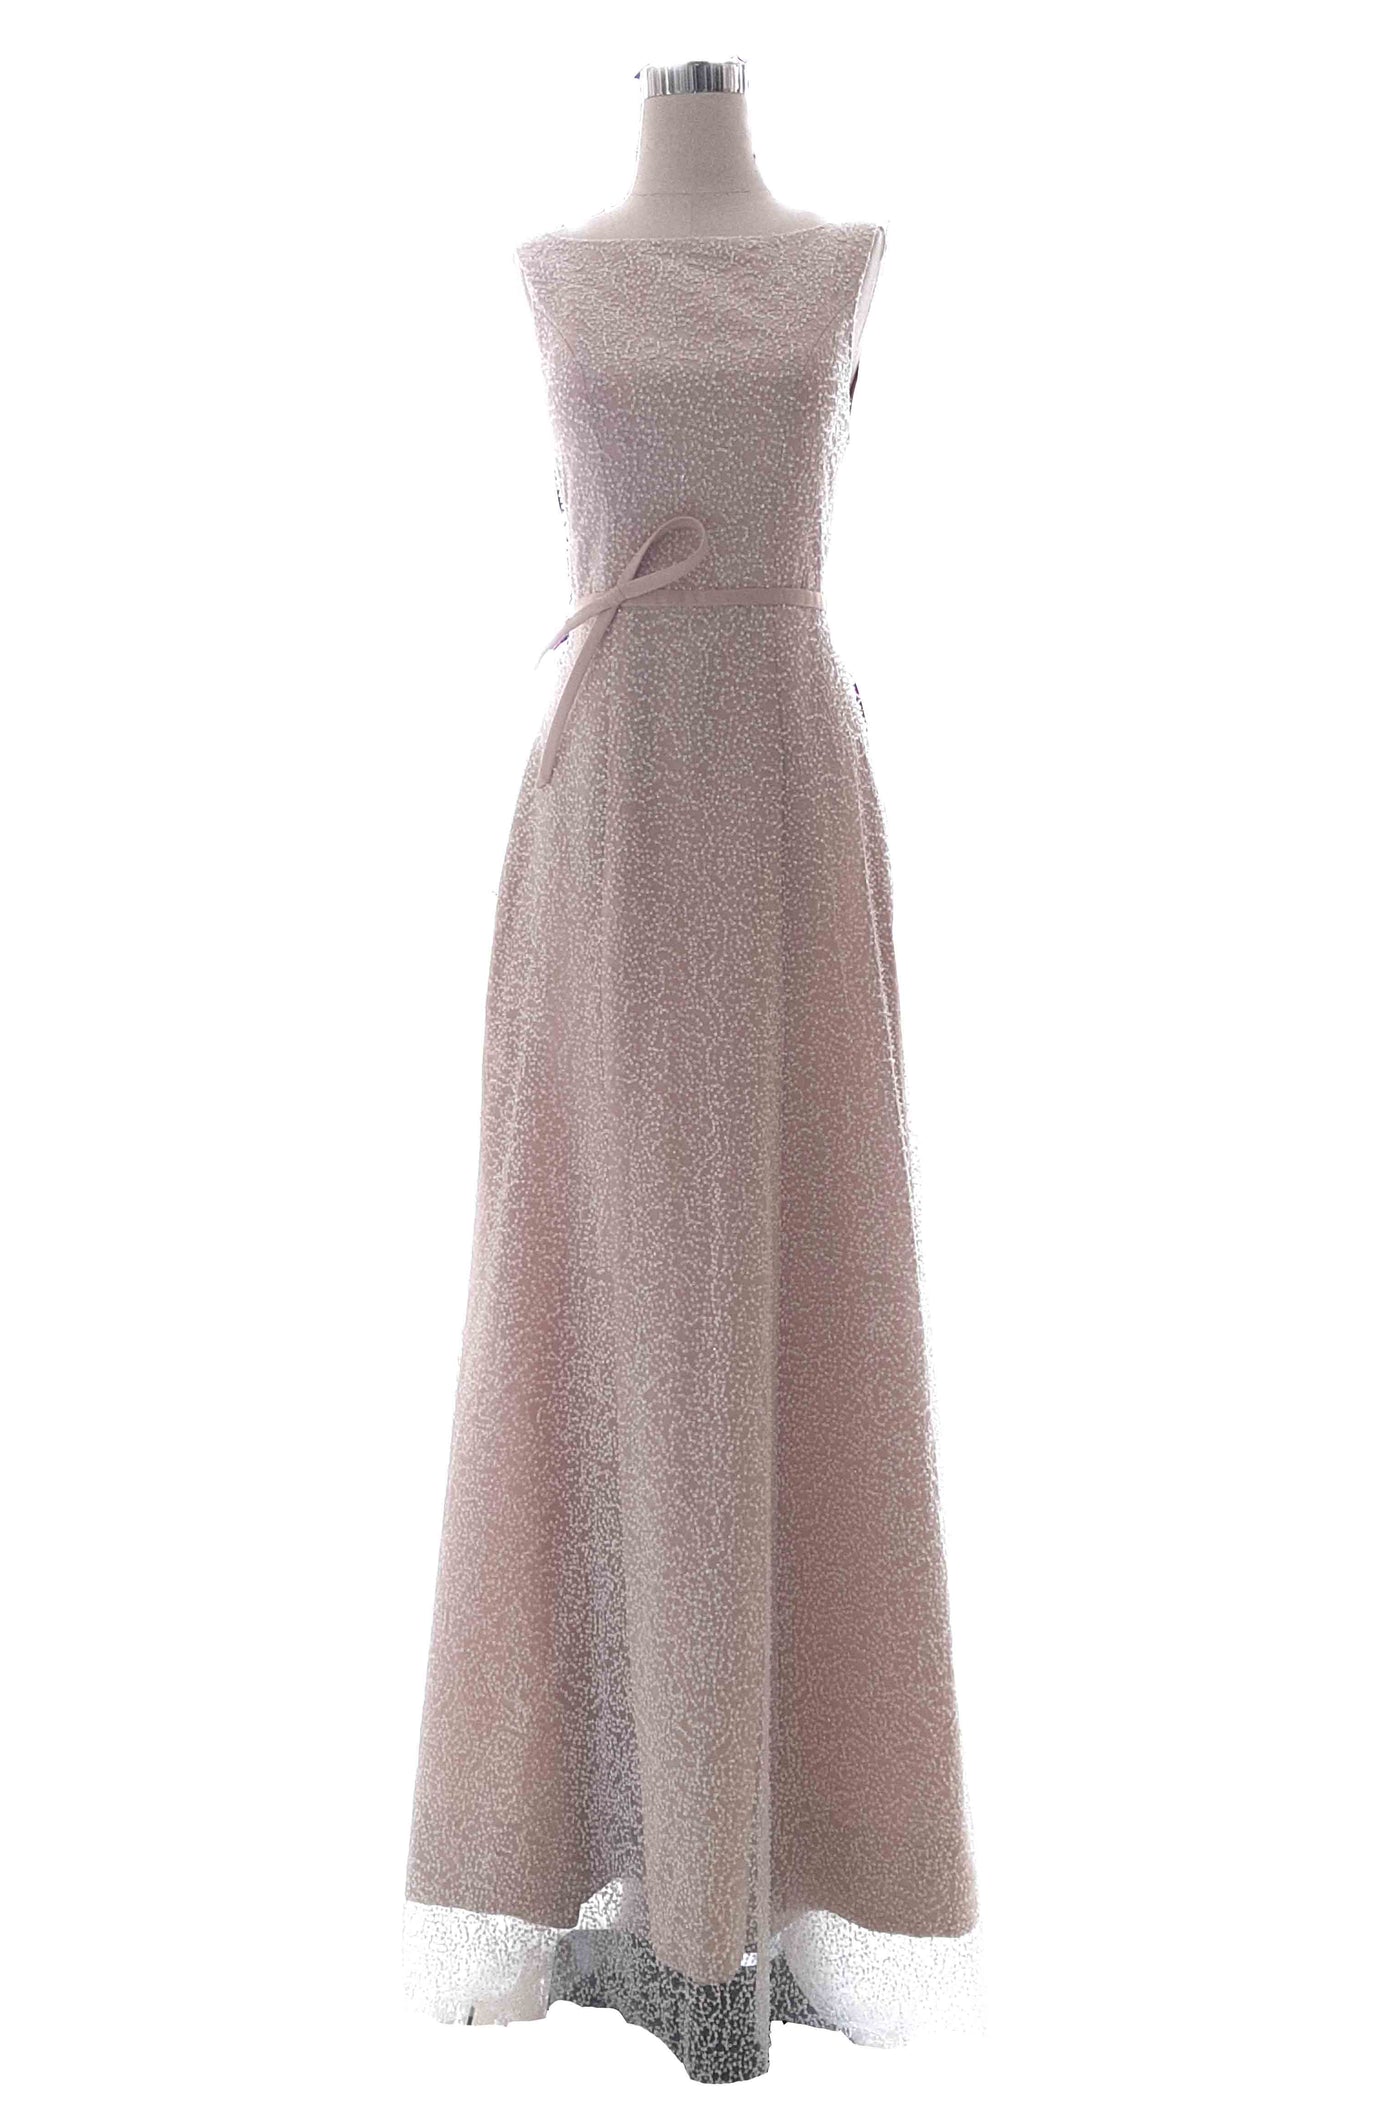 Buy : Liliana Lim - A Line with Bow at The Waist Gown